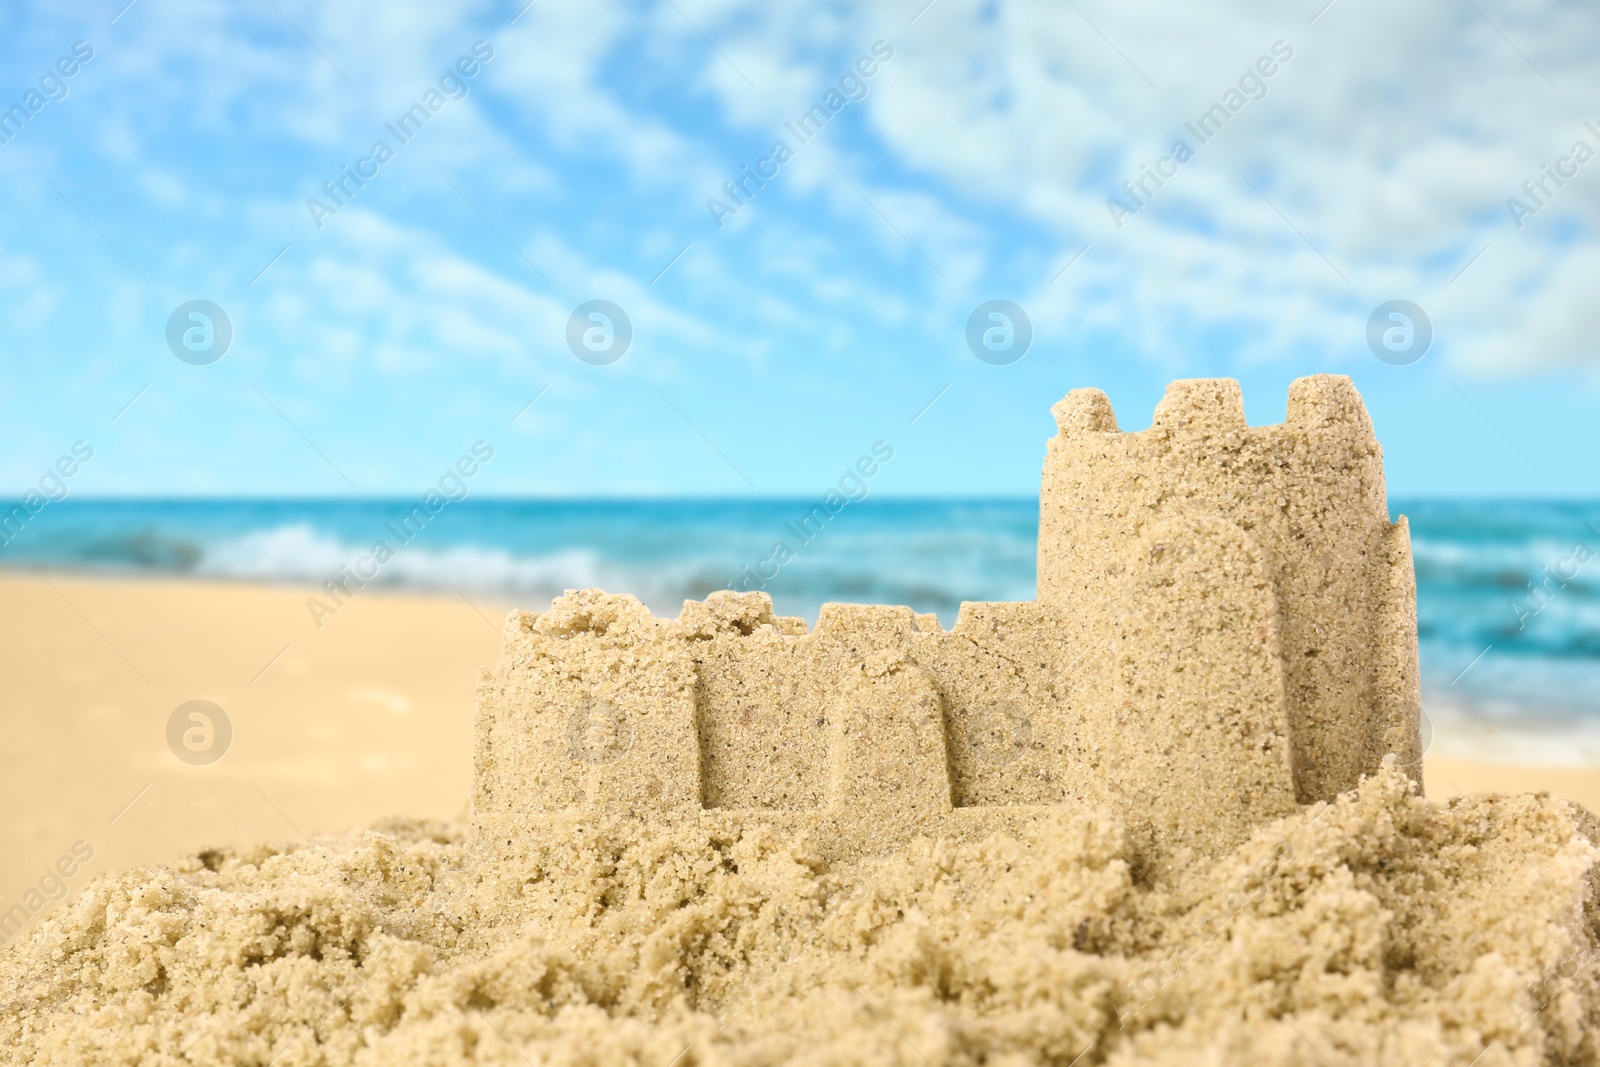 Image of Sand castle on ocean beach, closeup with space for text. Outdoor play